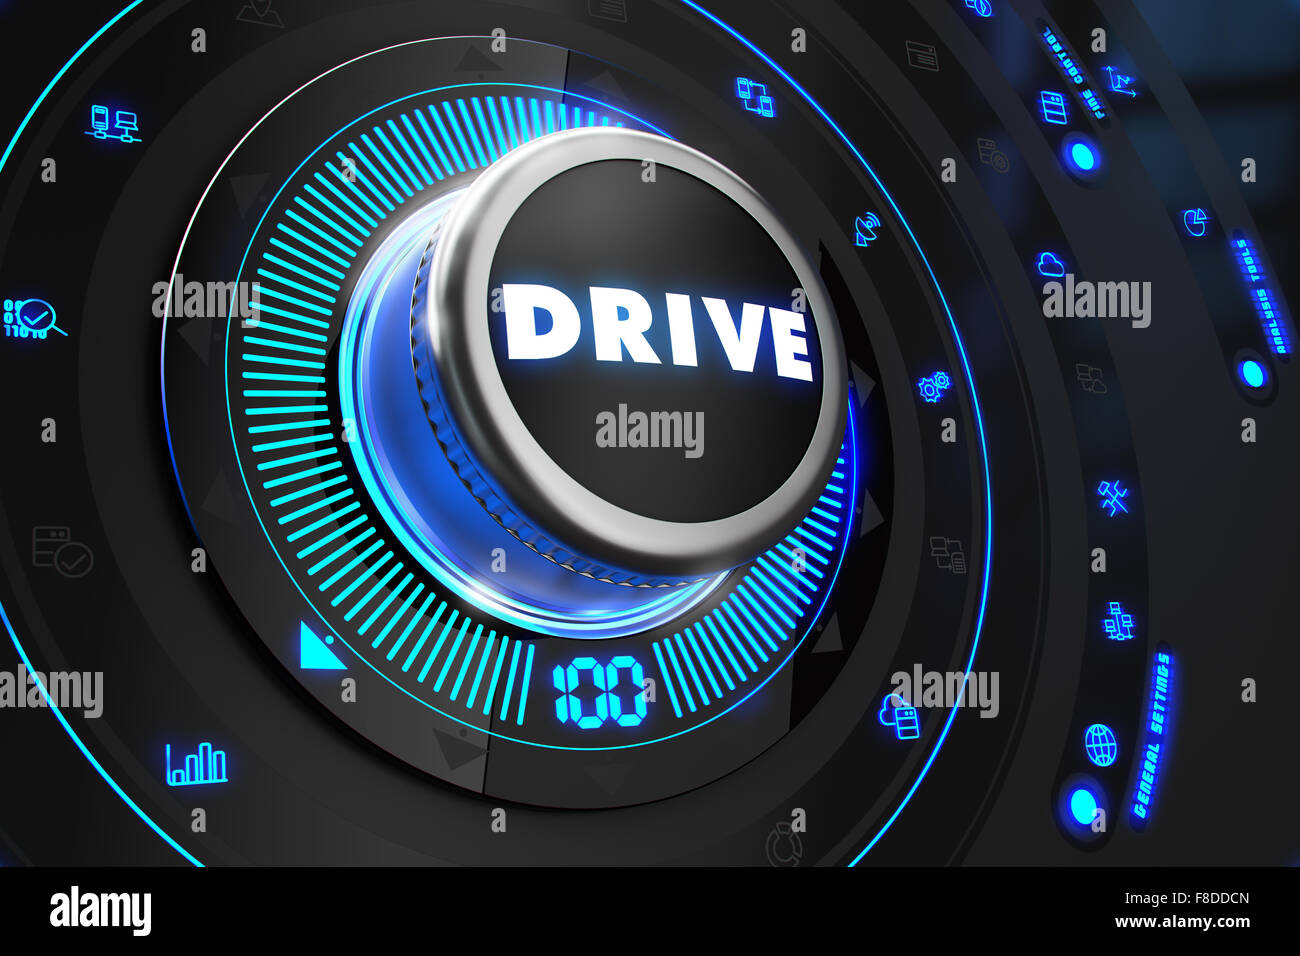 Drive Controller on Black Control Console. Stock Photo